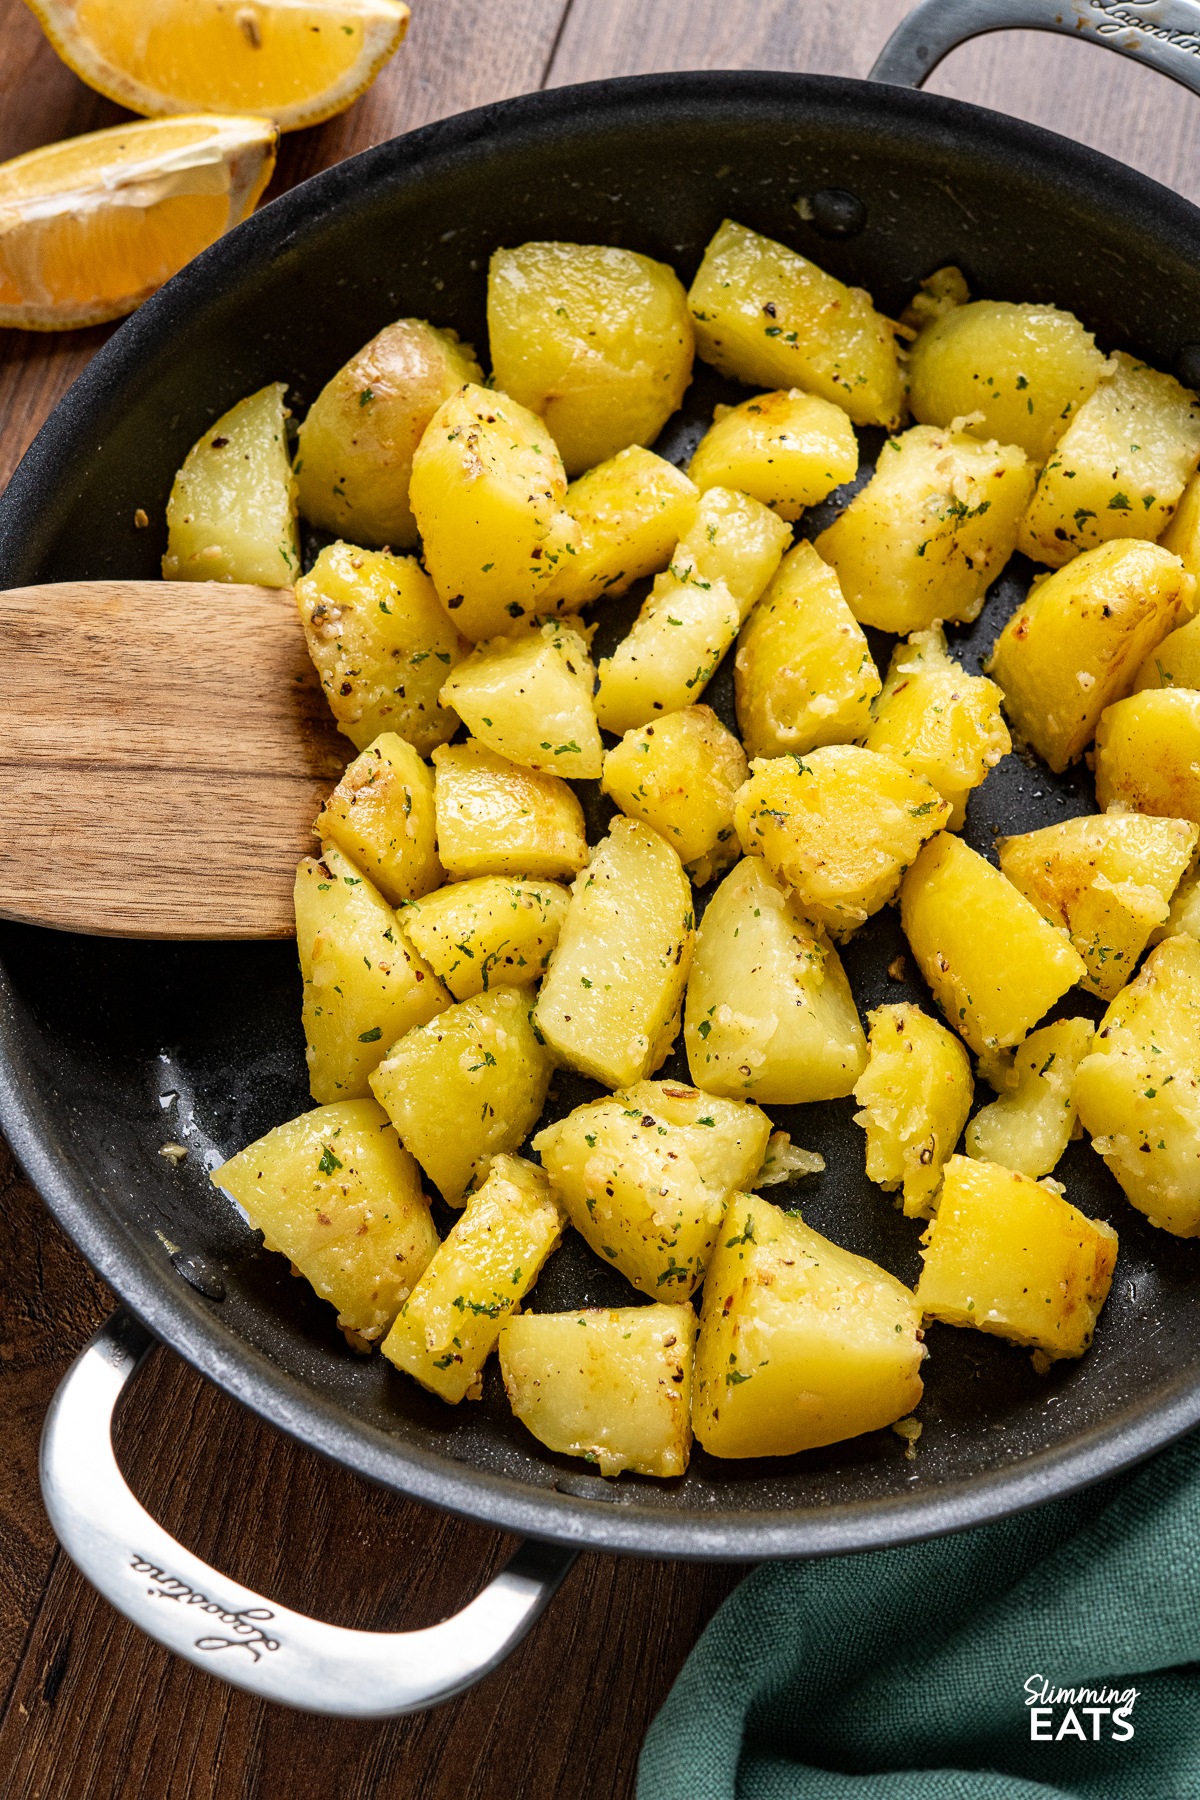 On a wooden board: Lemon garlic potatoes served in a non-stick double-handled skillet with wooden spatula and lemon slices